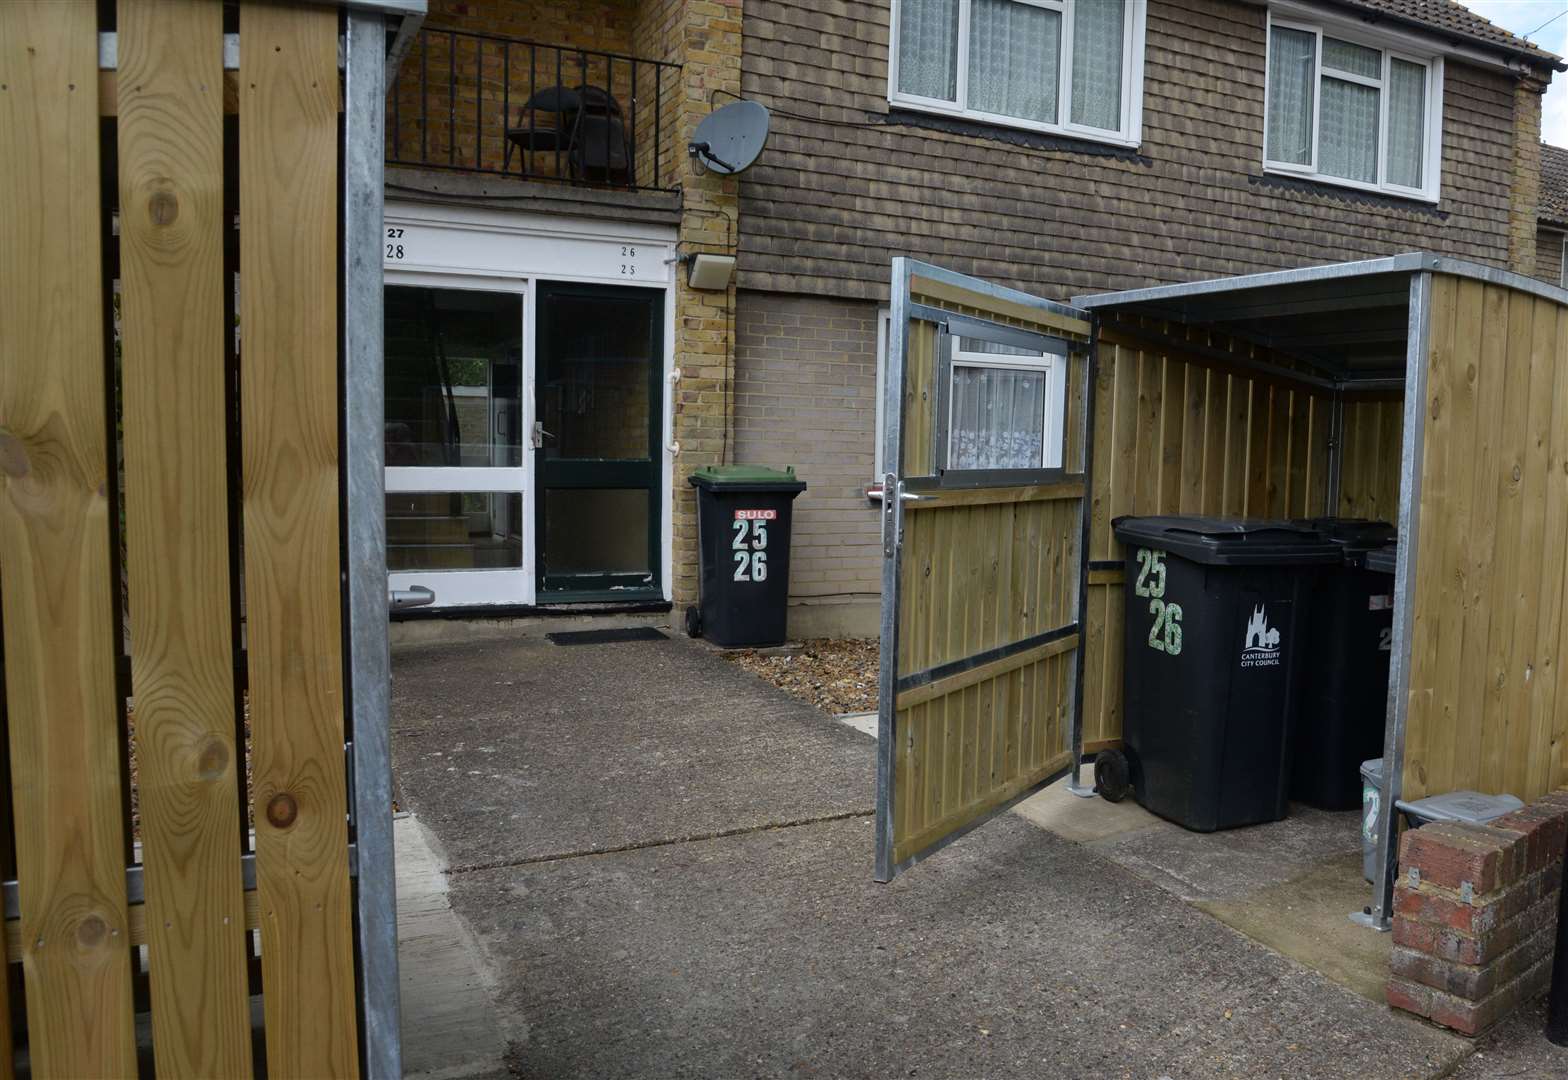 Residents have described the bin sheds as seven-foot tall eyesores